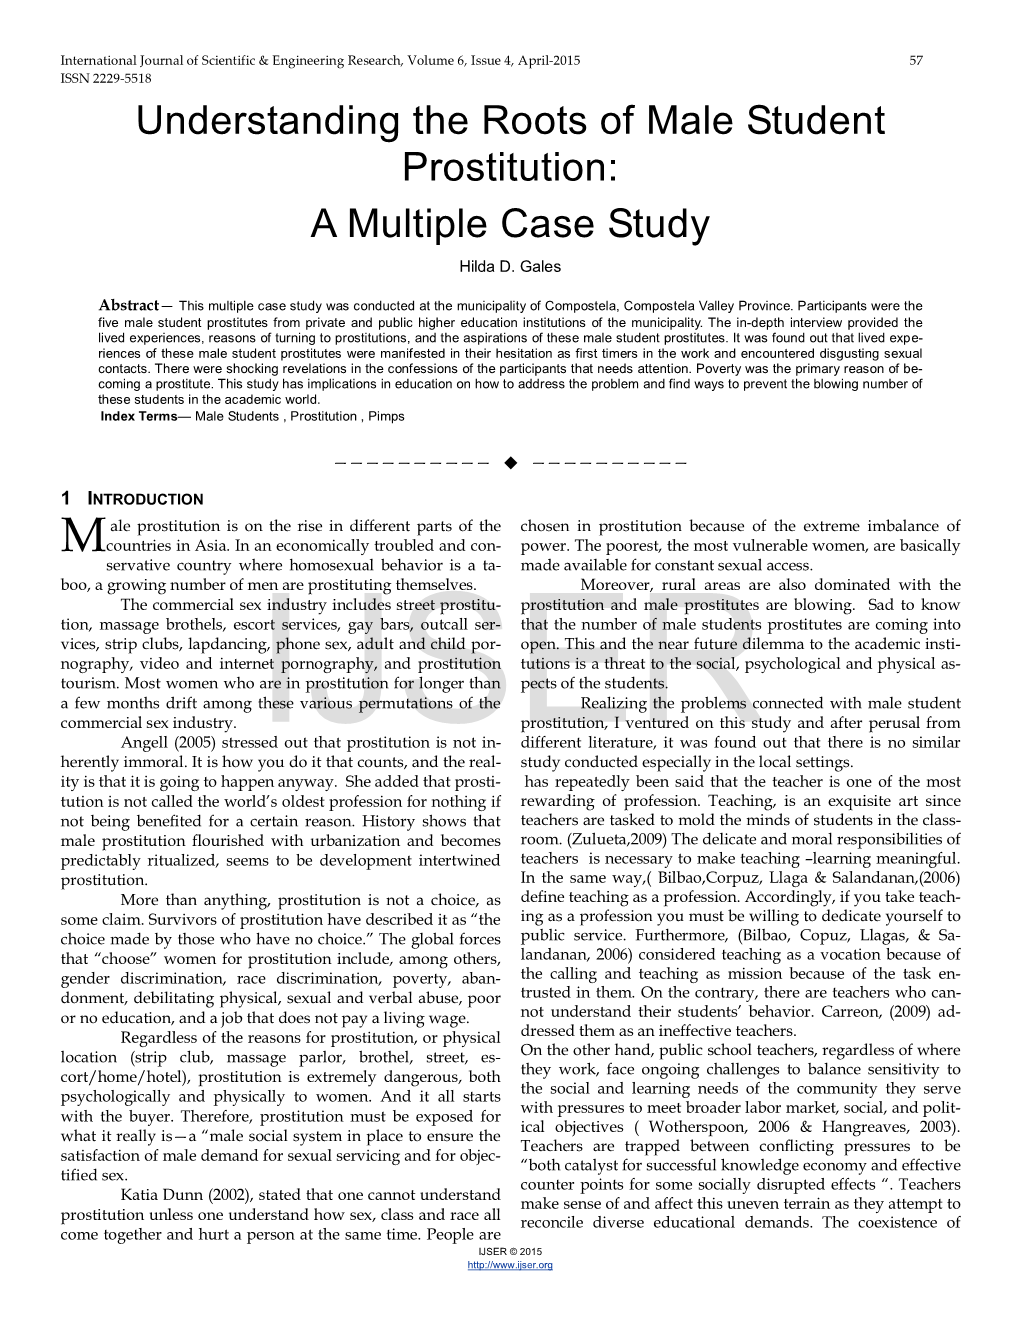 Understanding the Roots of Male Student Prostitution: a Multiple Case Study Hilda D